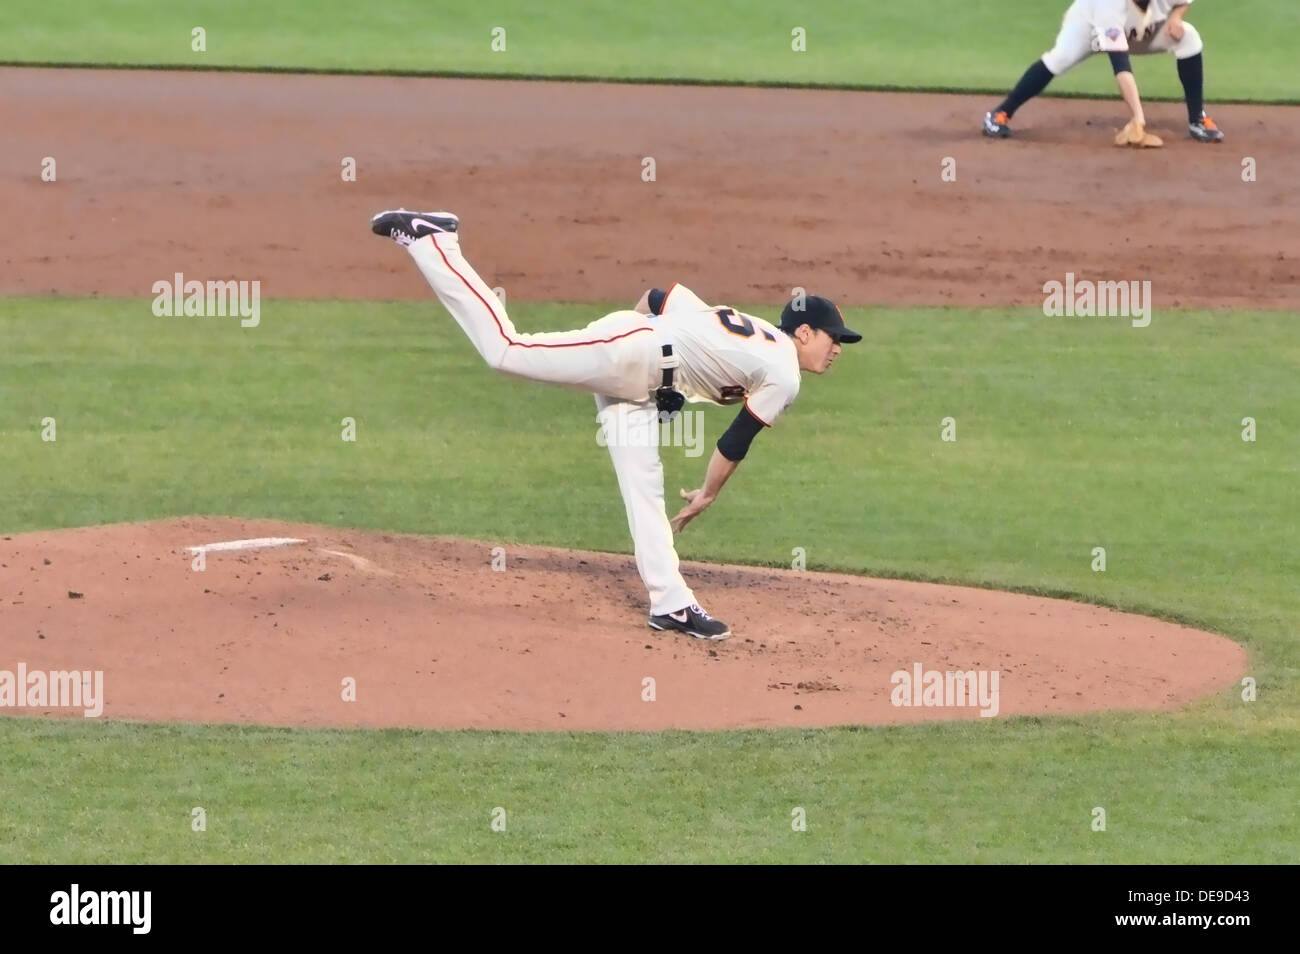 Tim Lincecum pitching for the San Francisco Giants at AT&T Park, San Francisco, California Stock Photo